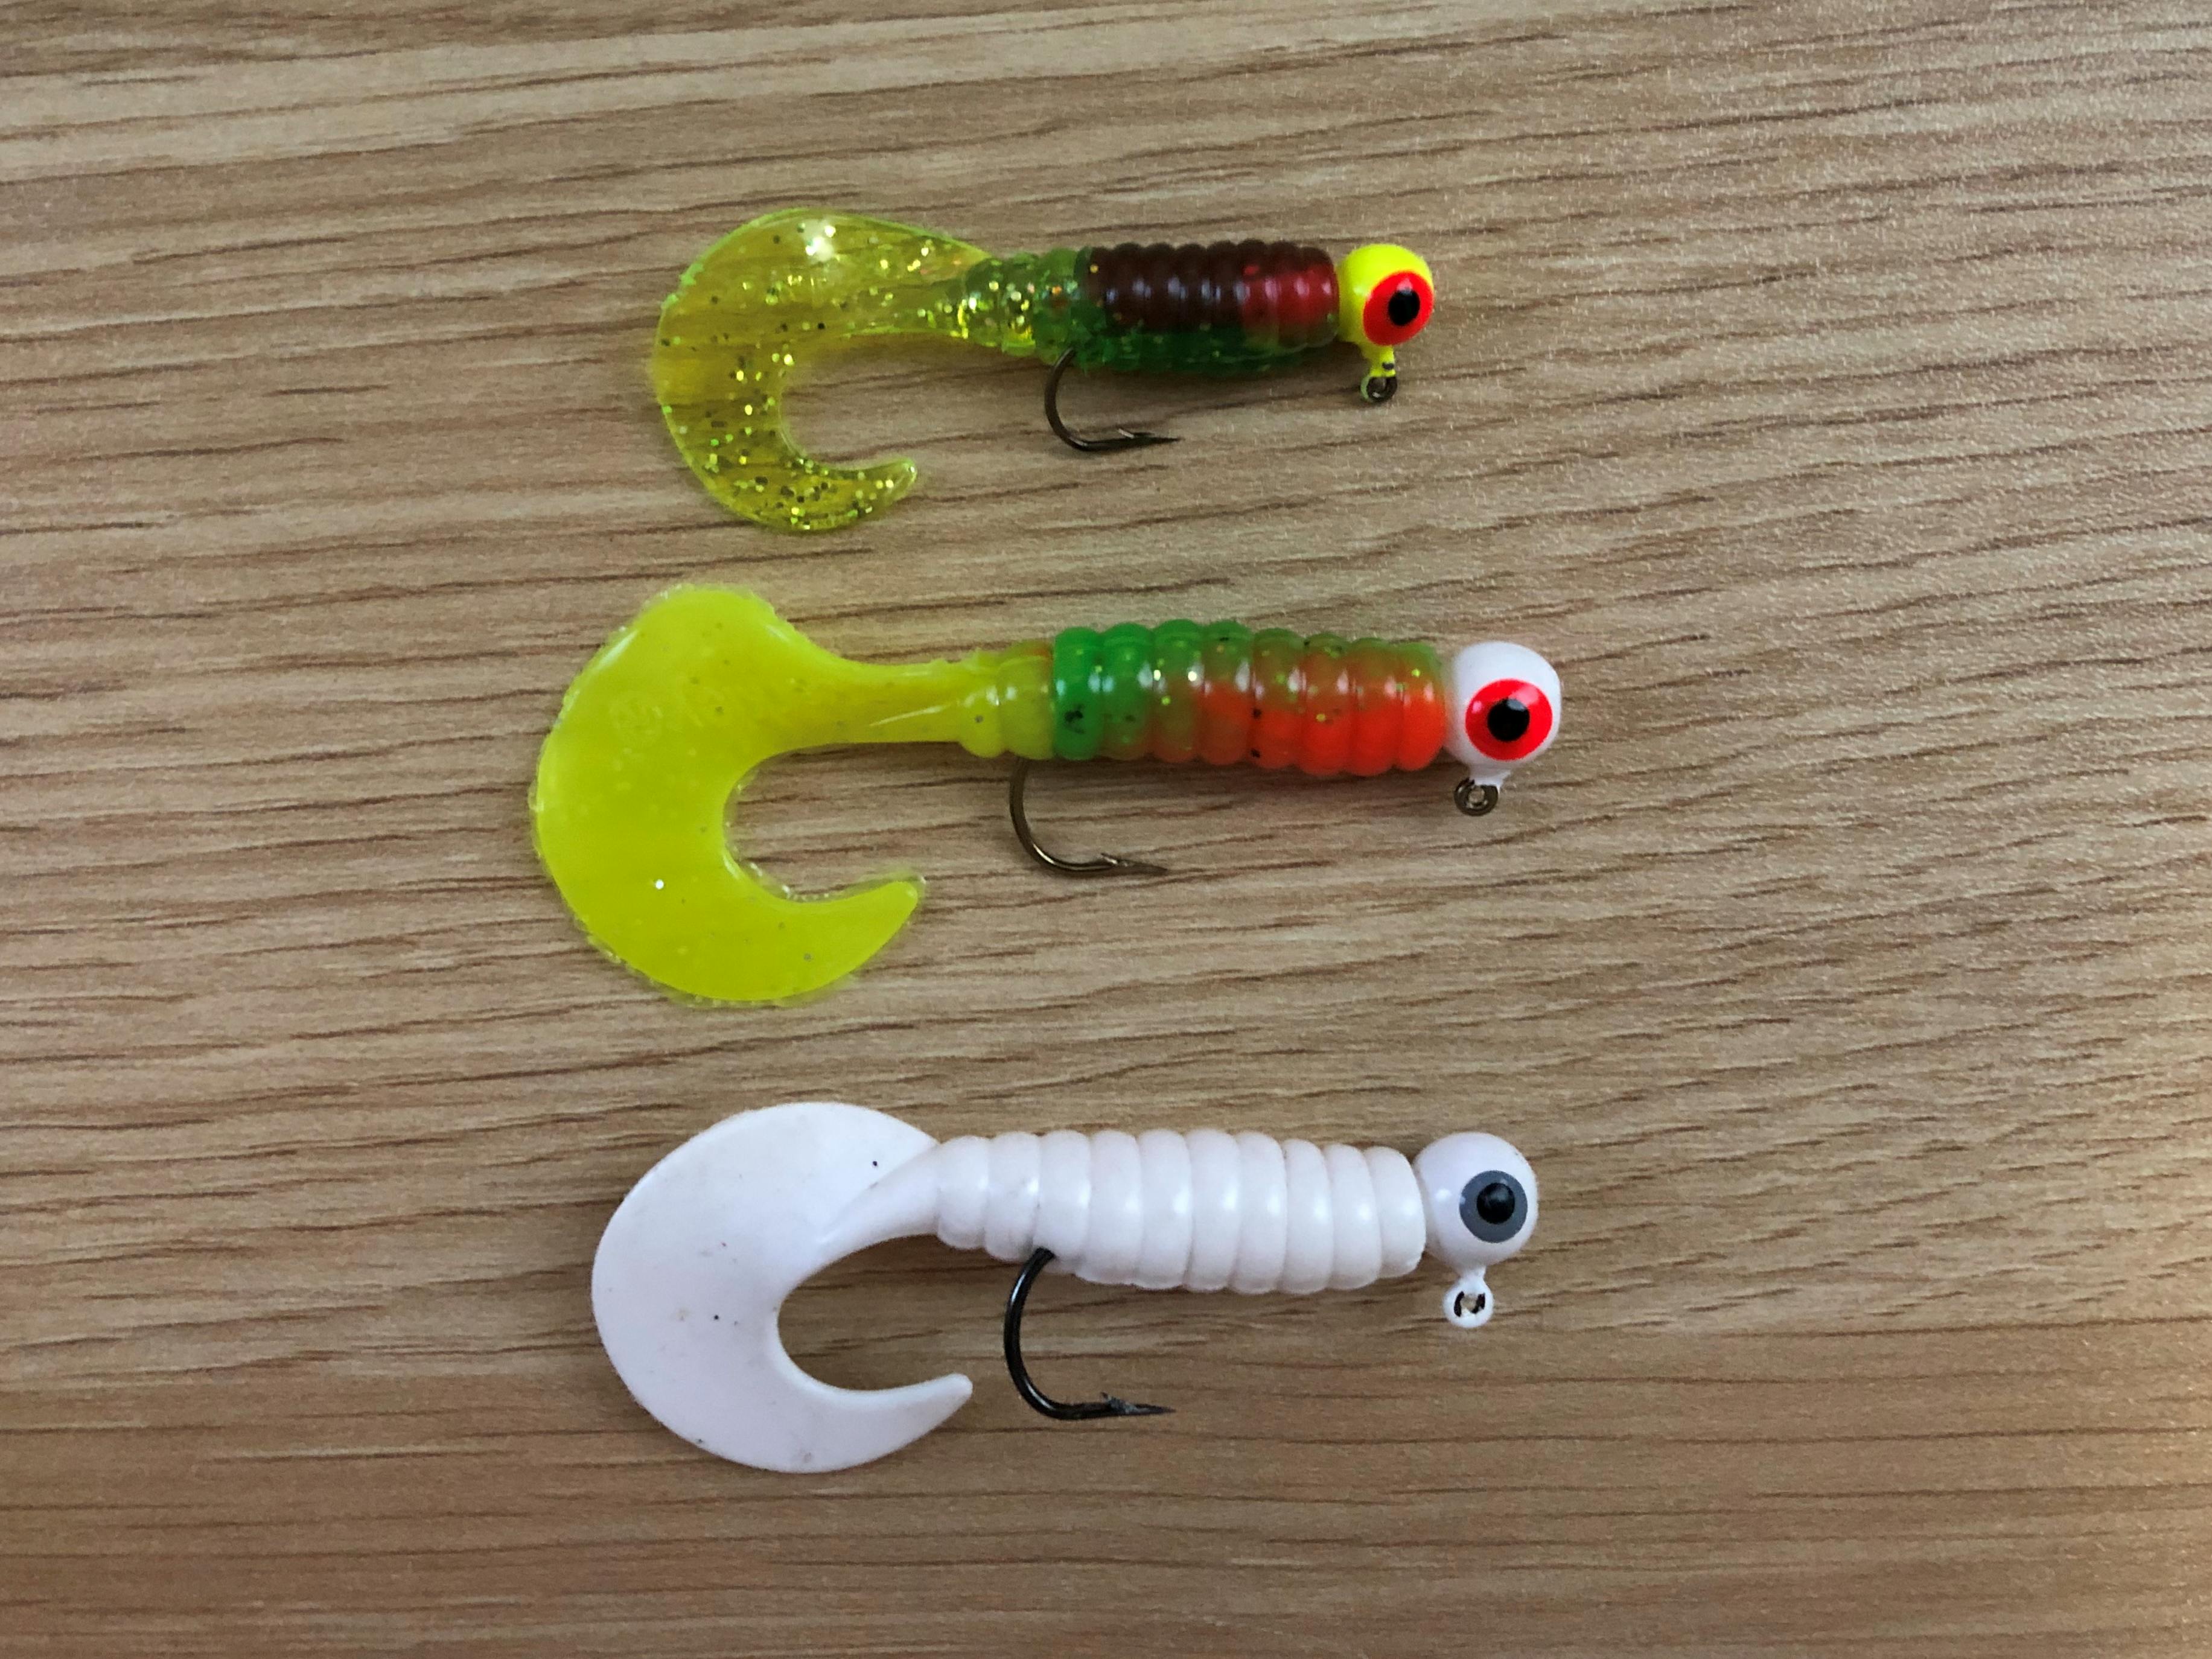 The Most Underrated Fishing Lure of All Time: The Twister Tail